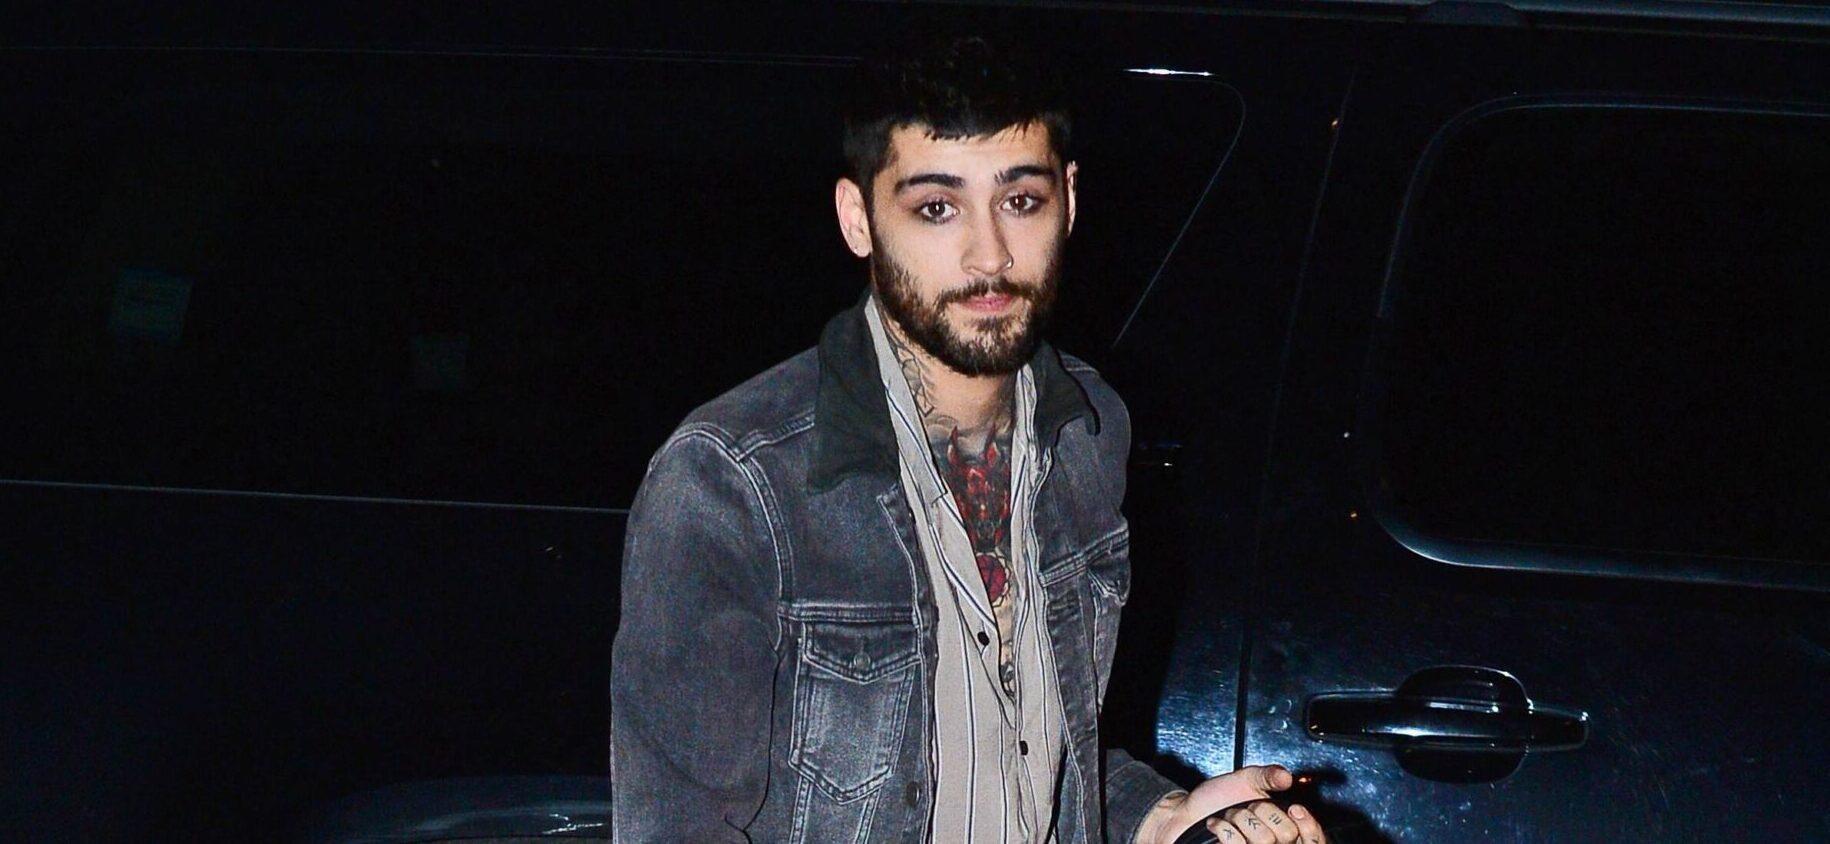 Zayn Malik steps out rocking eyeliner after leaving Gigi Hadid's apartment in NYC